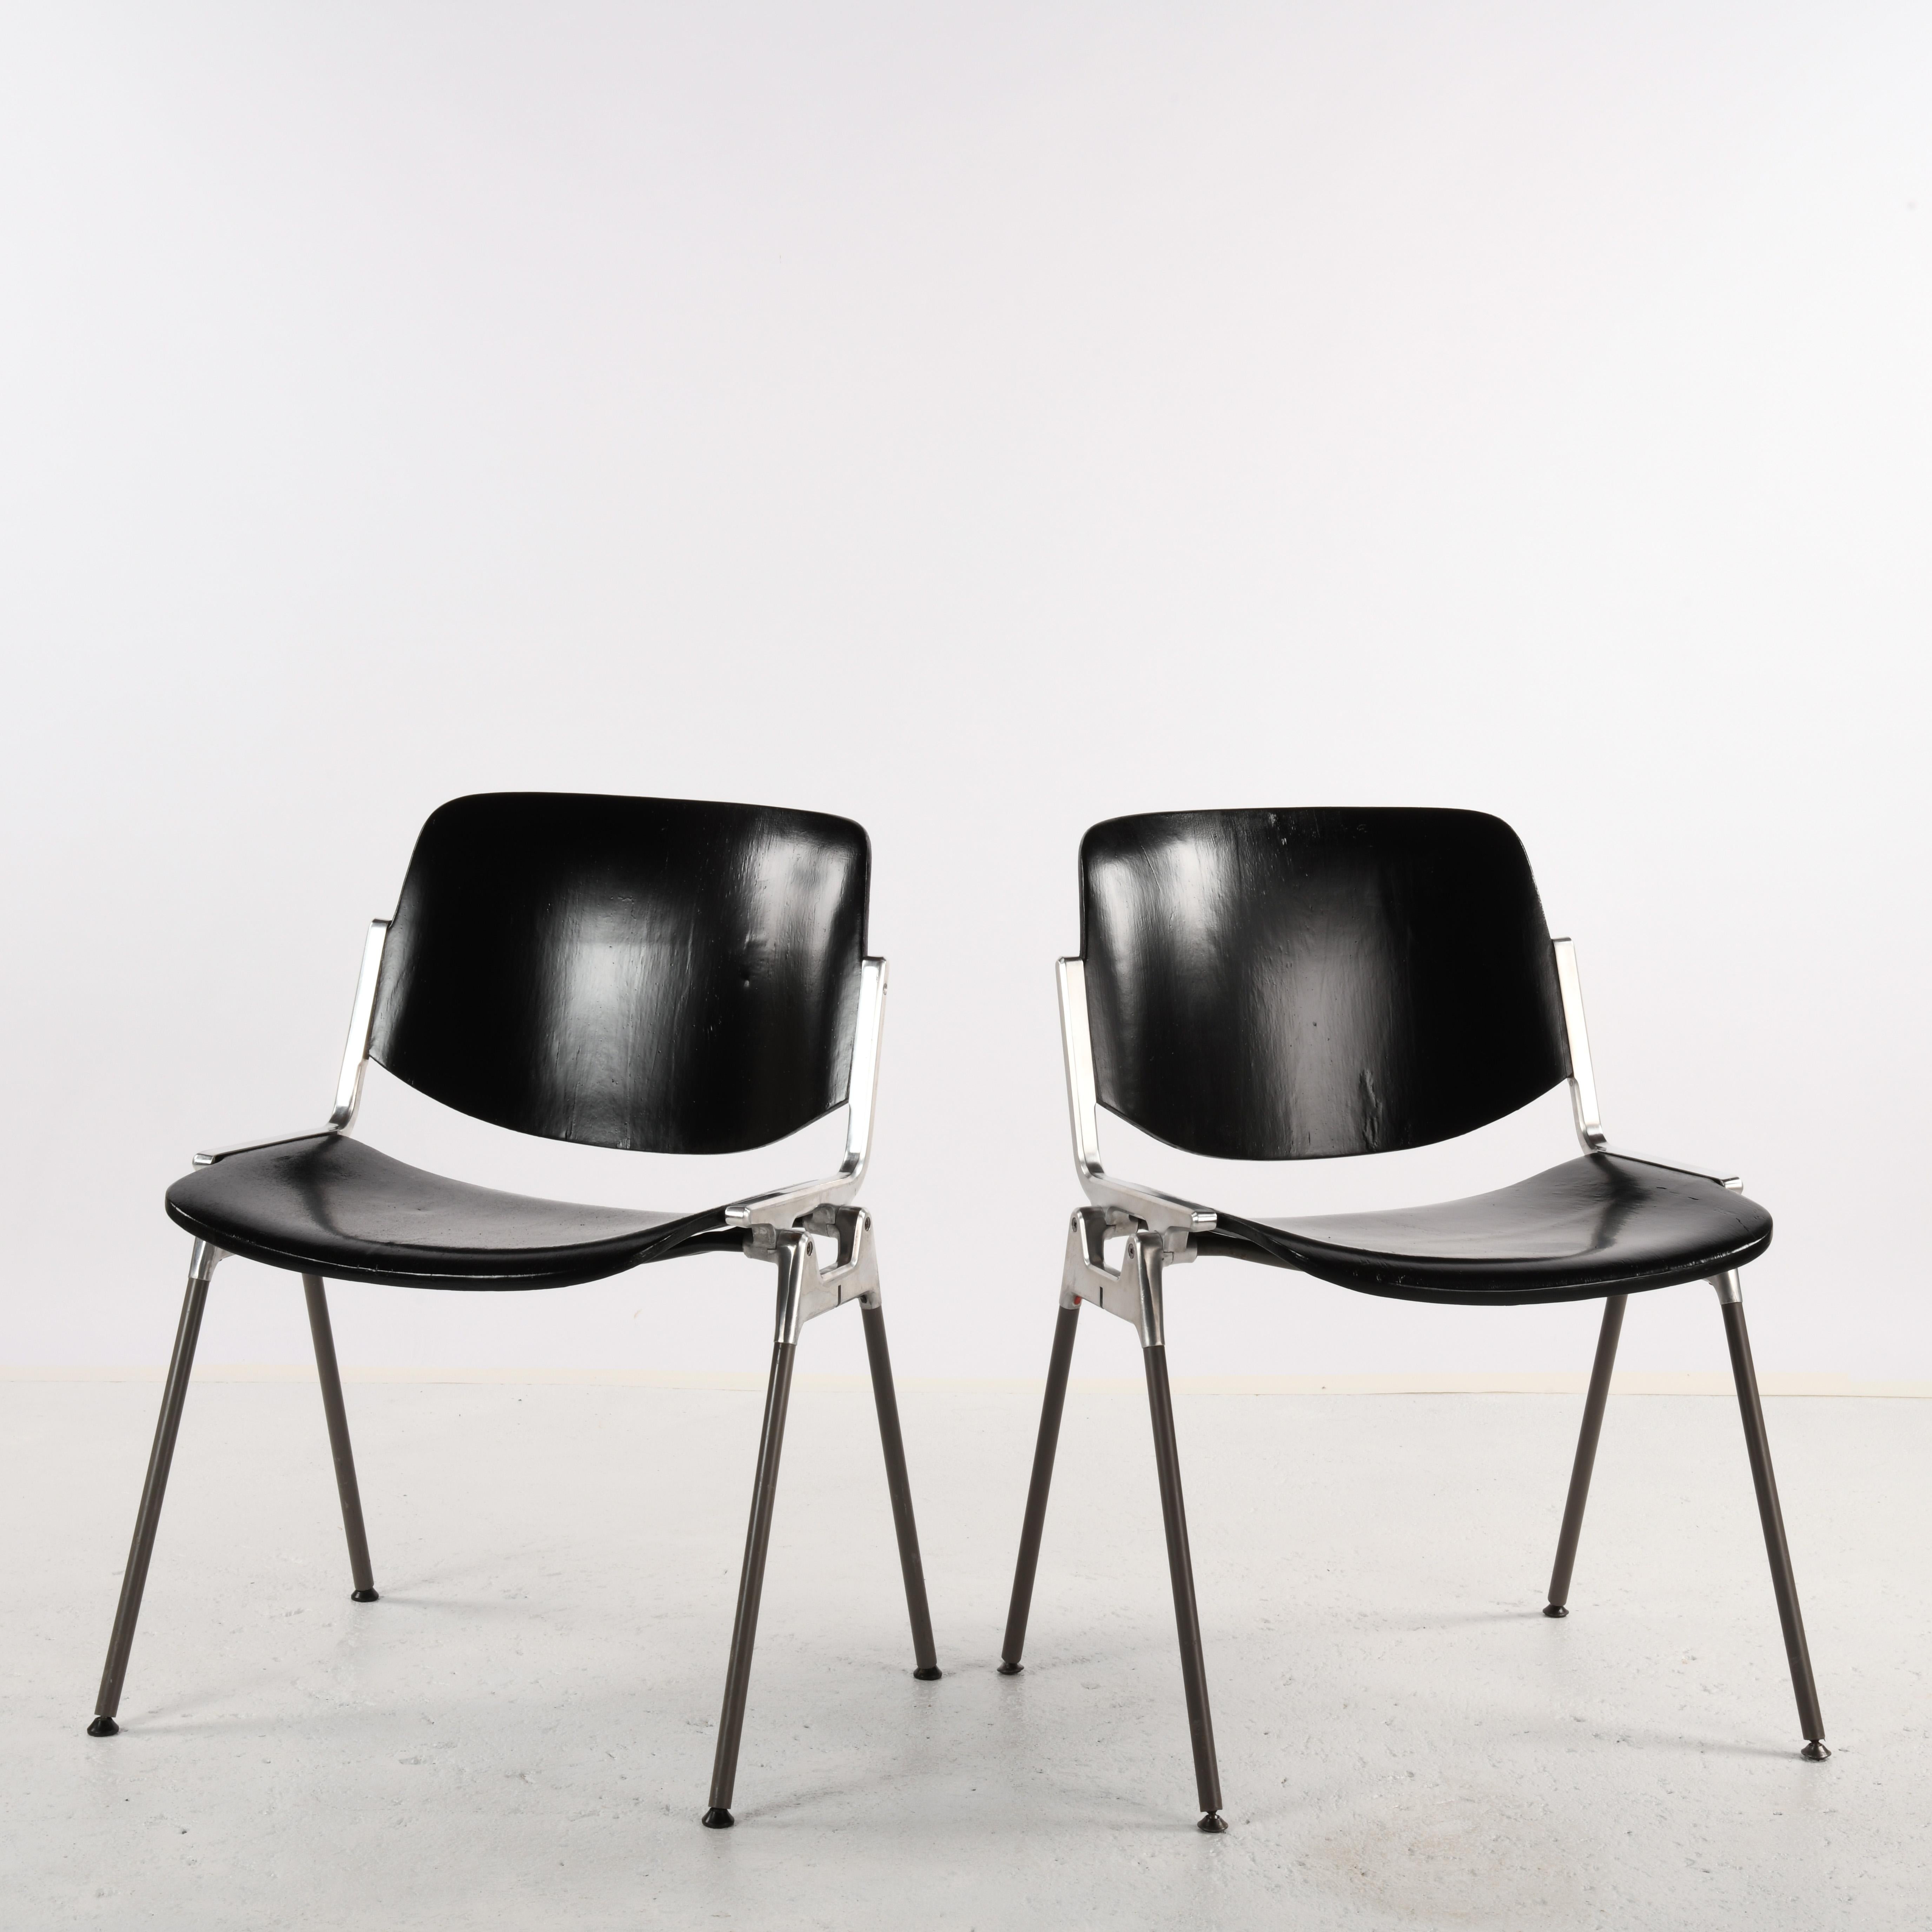 Pair of chairs model DSC 106 designed by Giancarlo Piretti in 1965 published by Castelli. Cast aluminium frame, metal legs upholstered in plastic, painted wooden seat and back. The seat and back were originally upholstered in fabric, but have been